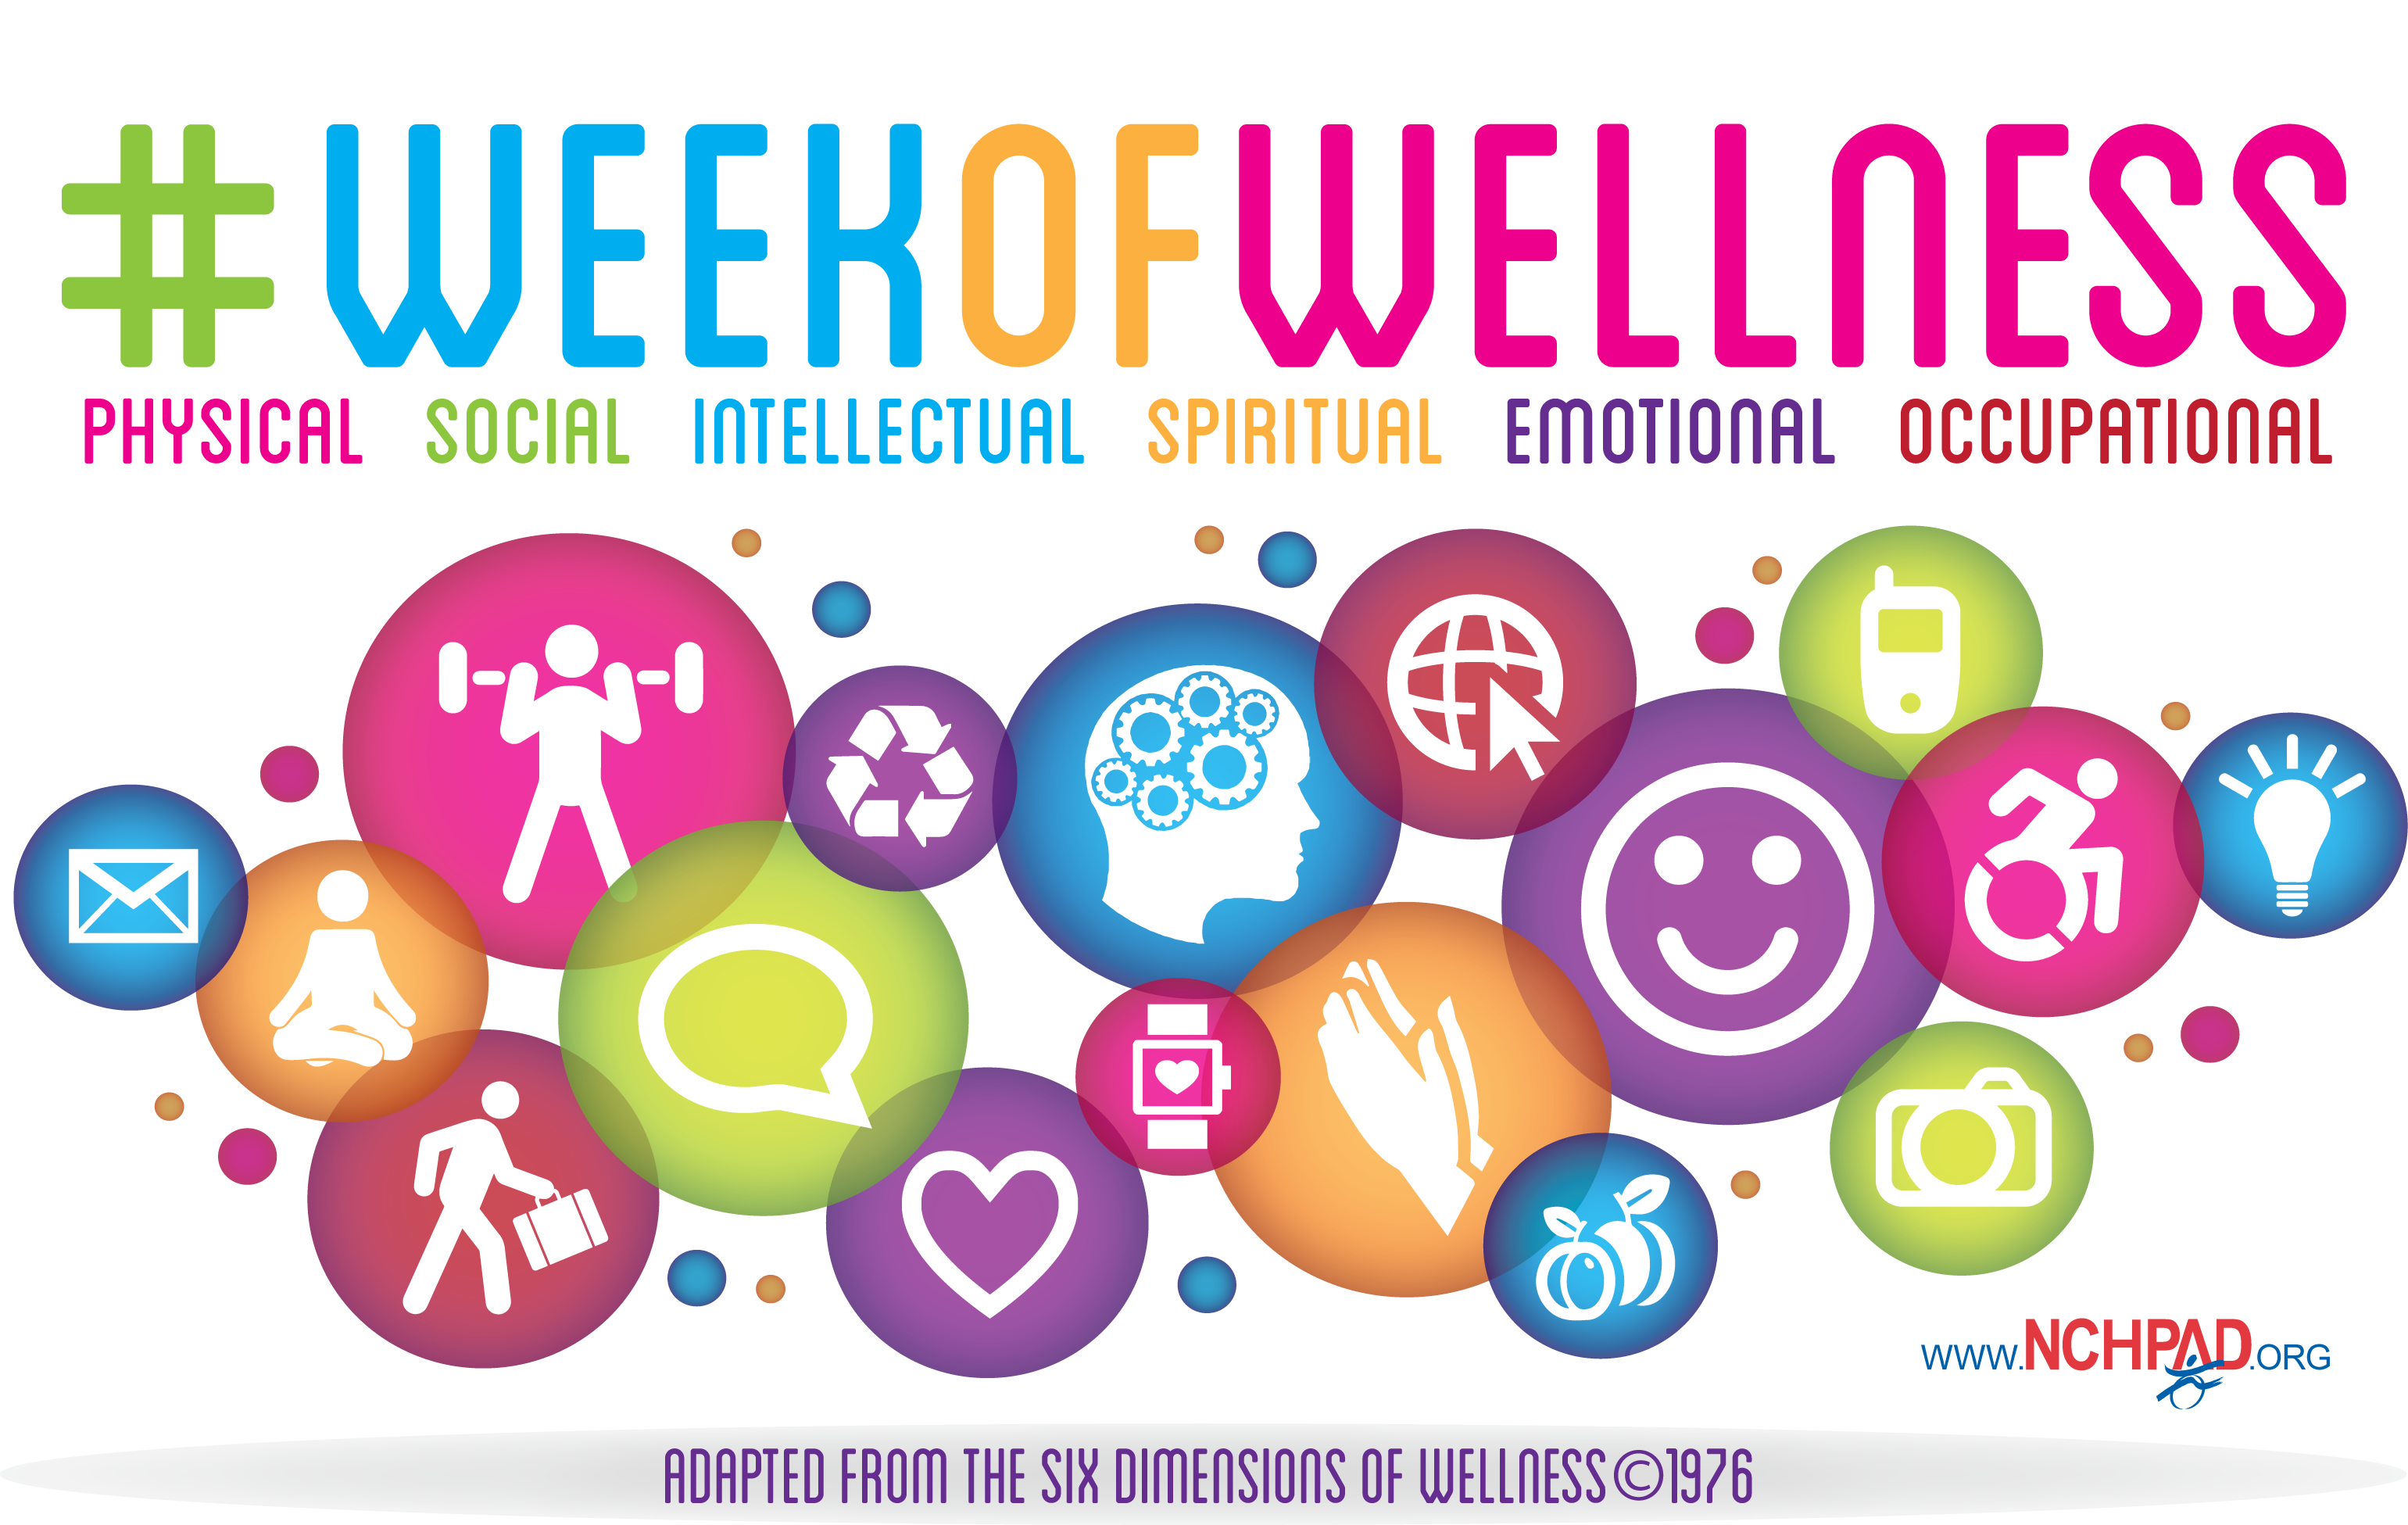 A Week's Worth of Wellness : NCHPAD - Building Healthy Inclusive Communities